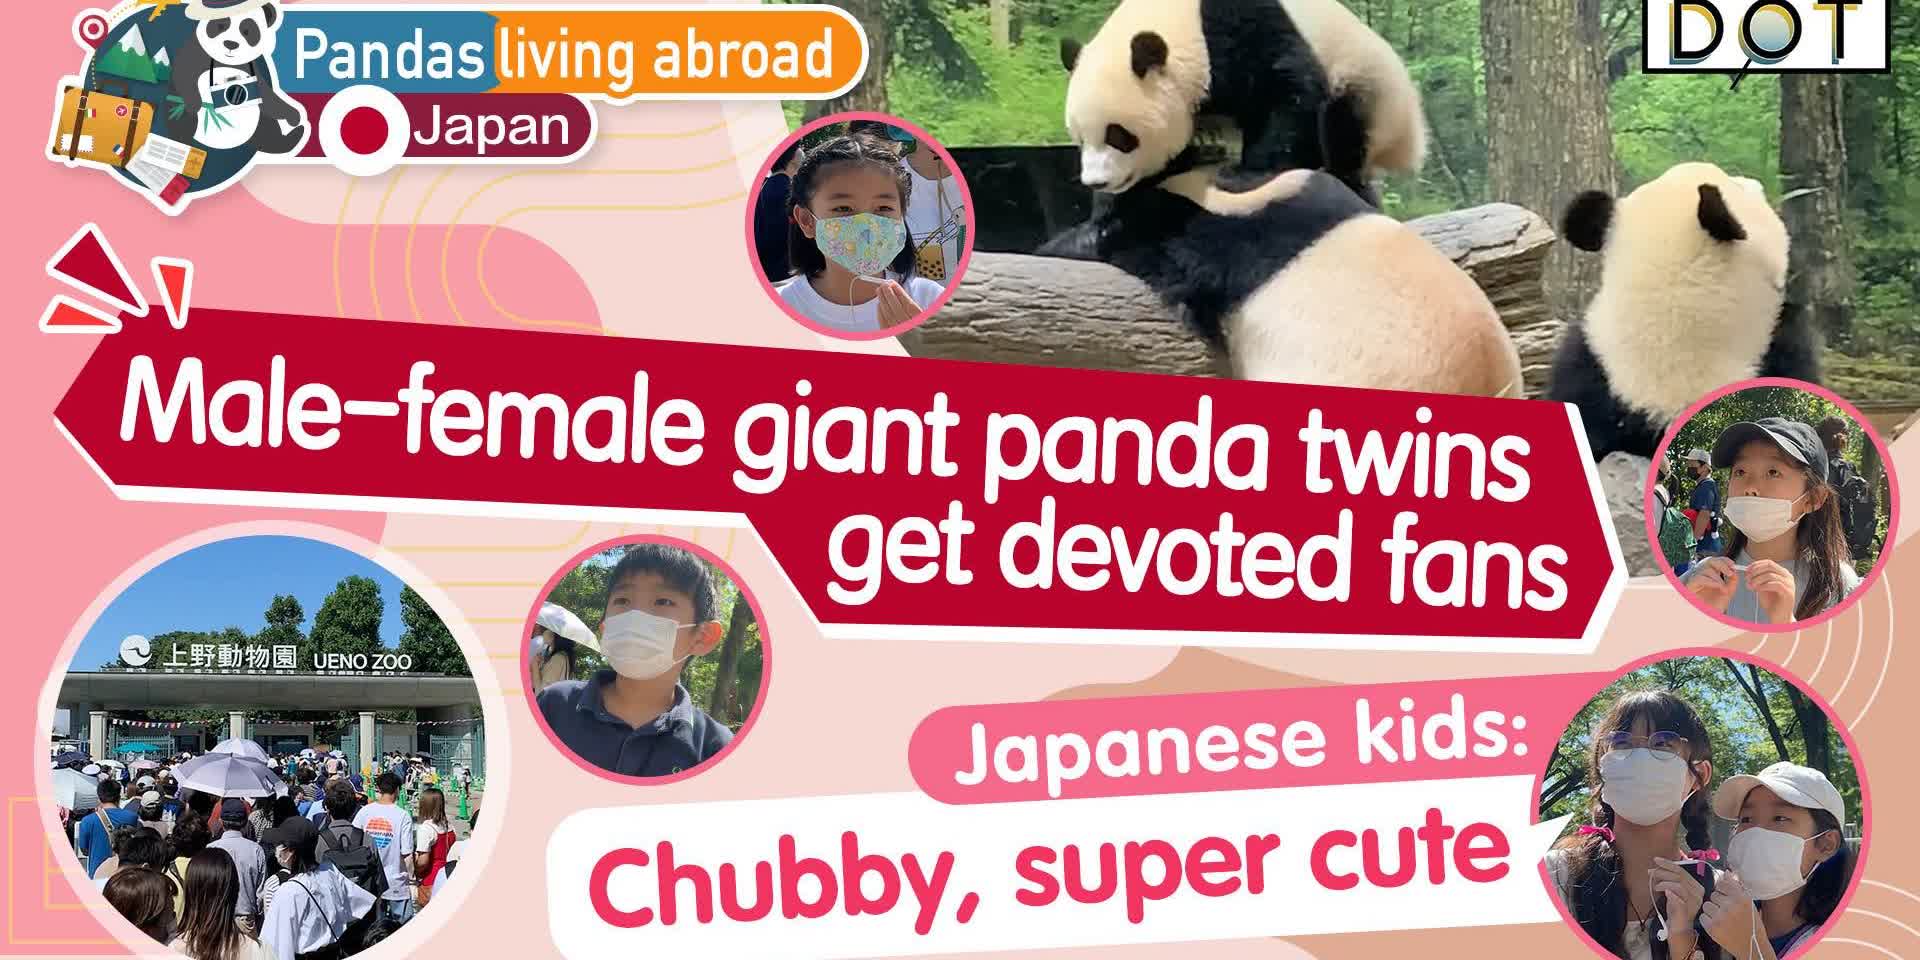 Pandas living abroad · Japan | Three giant pandas attract numerous devoted fans in Tokyo